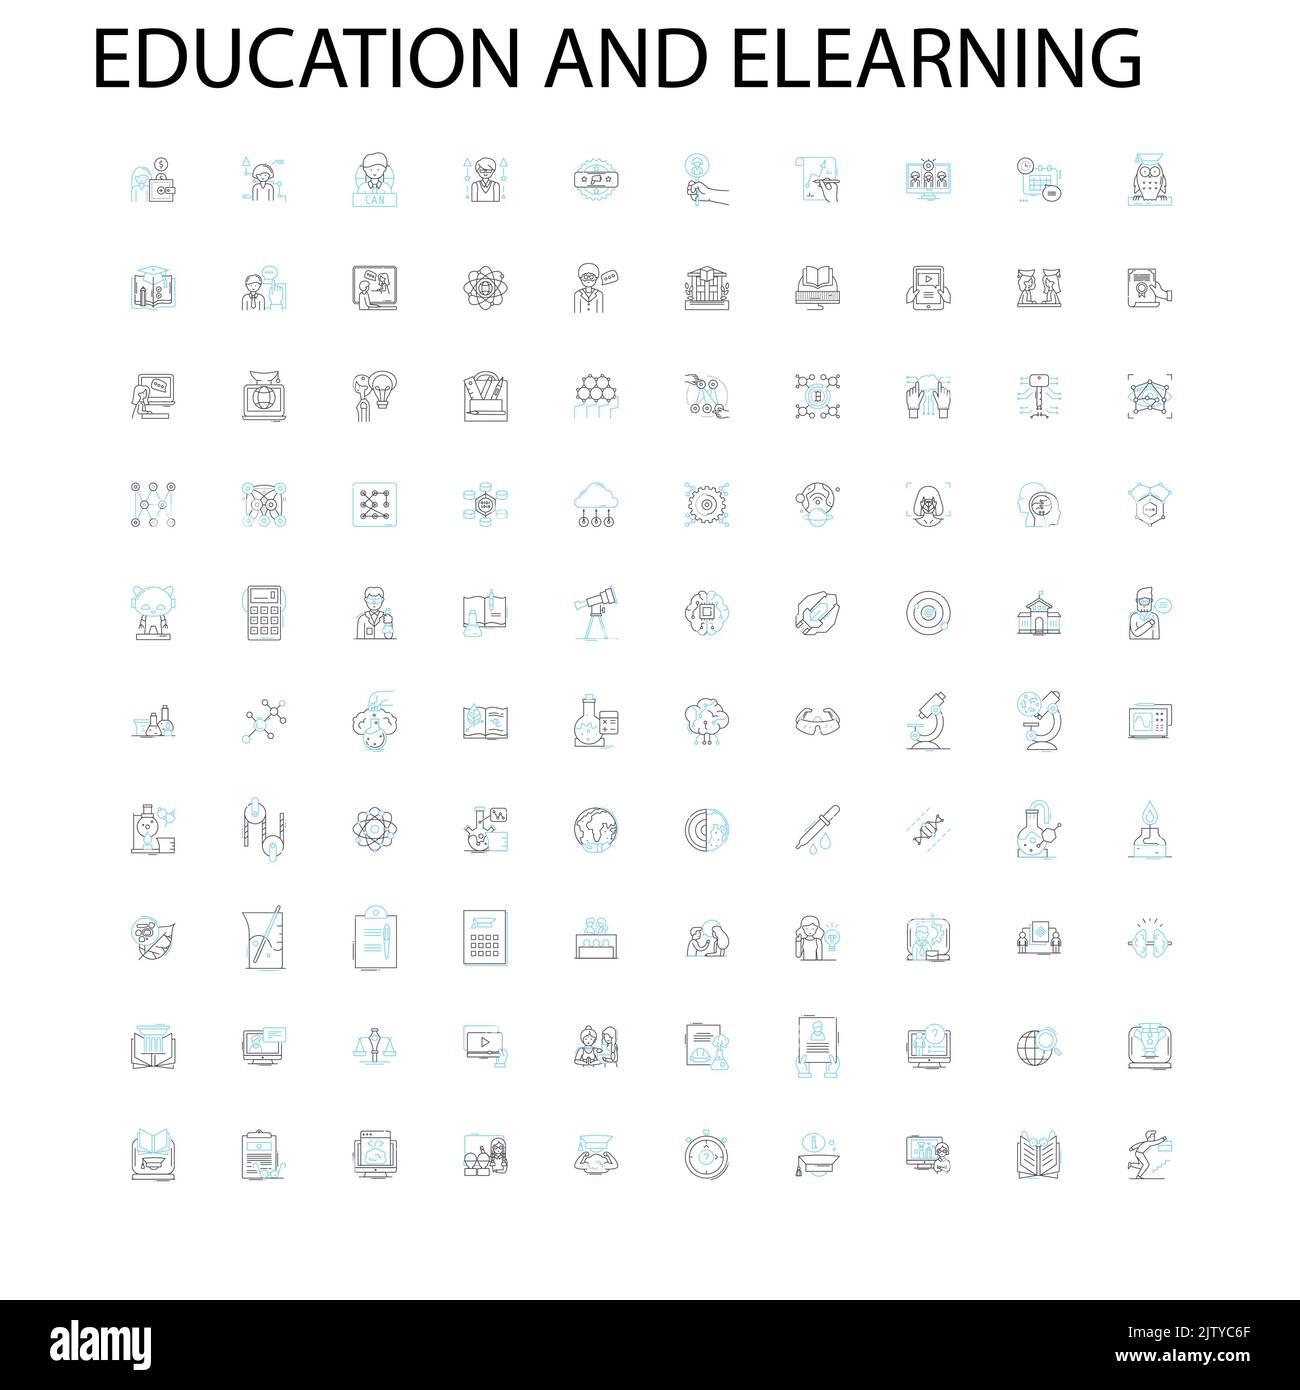 education and elearning icons, signs, outline symbols, concept linear illustration line collection Stock Vector